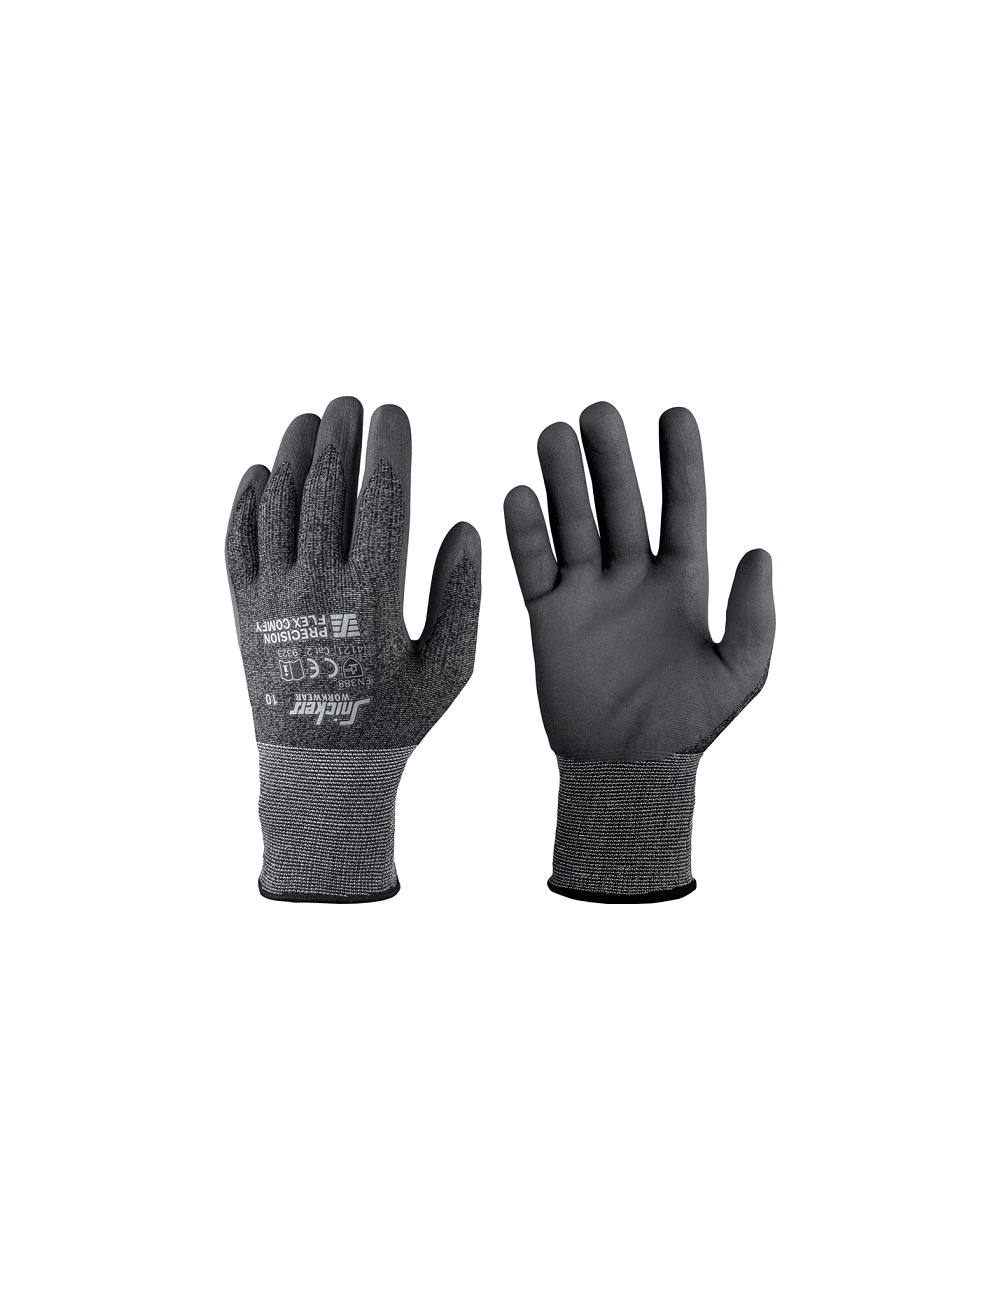 Work gloves Snickers 9323 Precision Flex Comfy